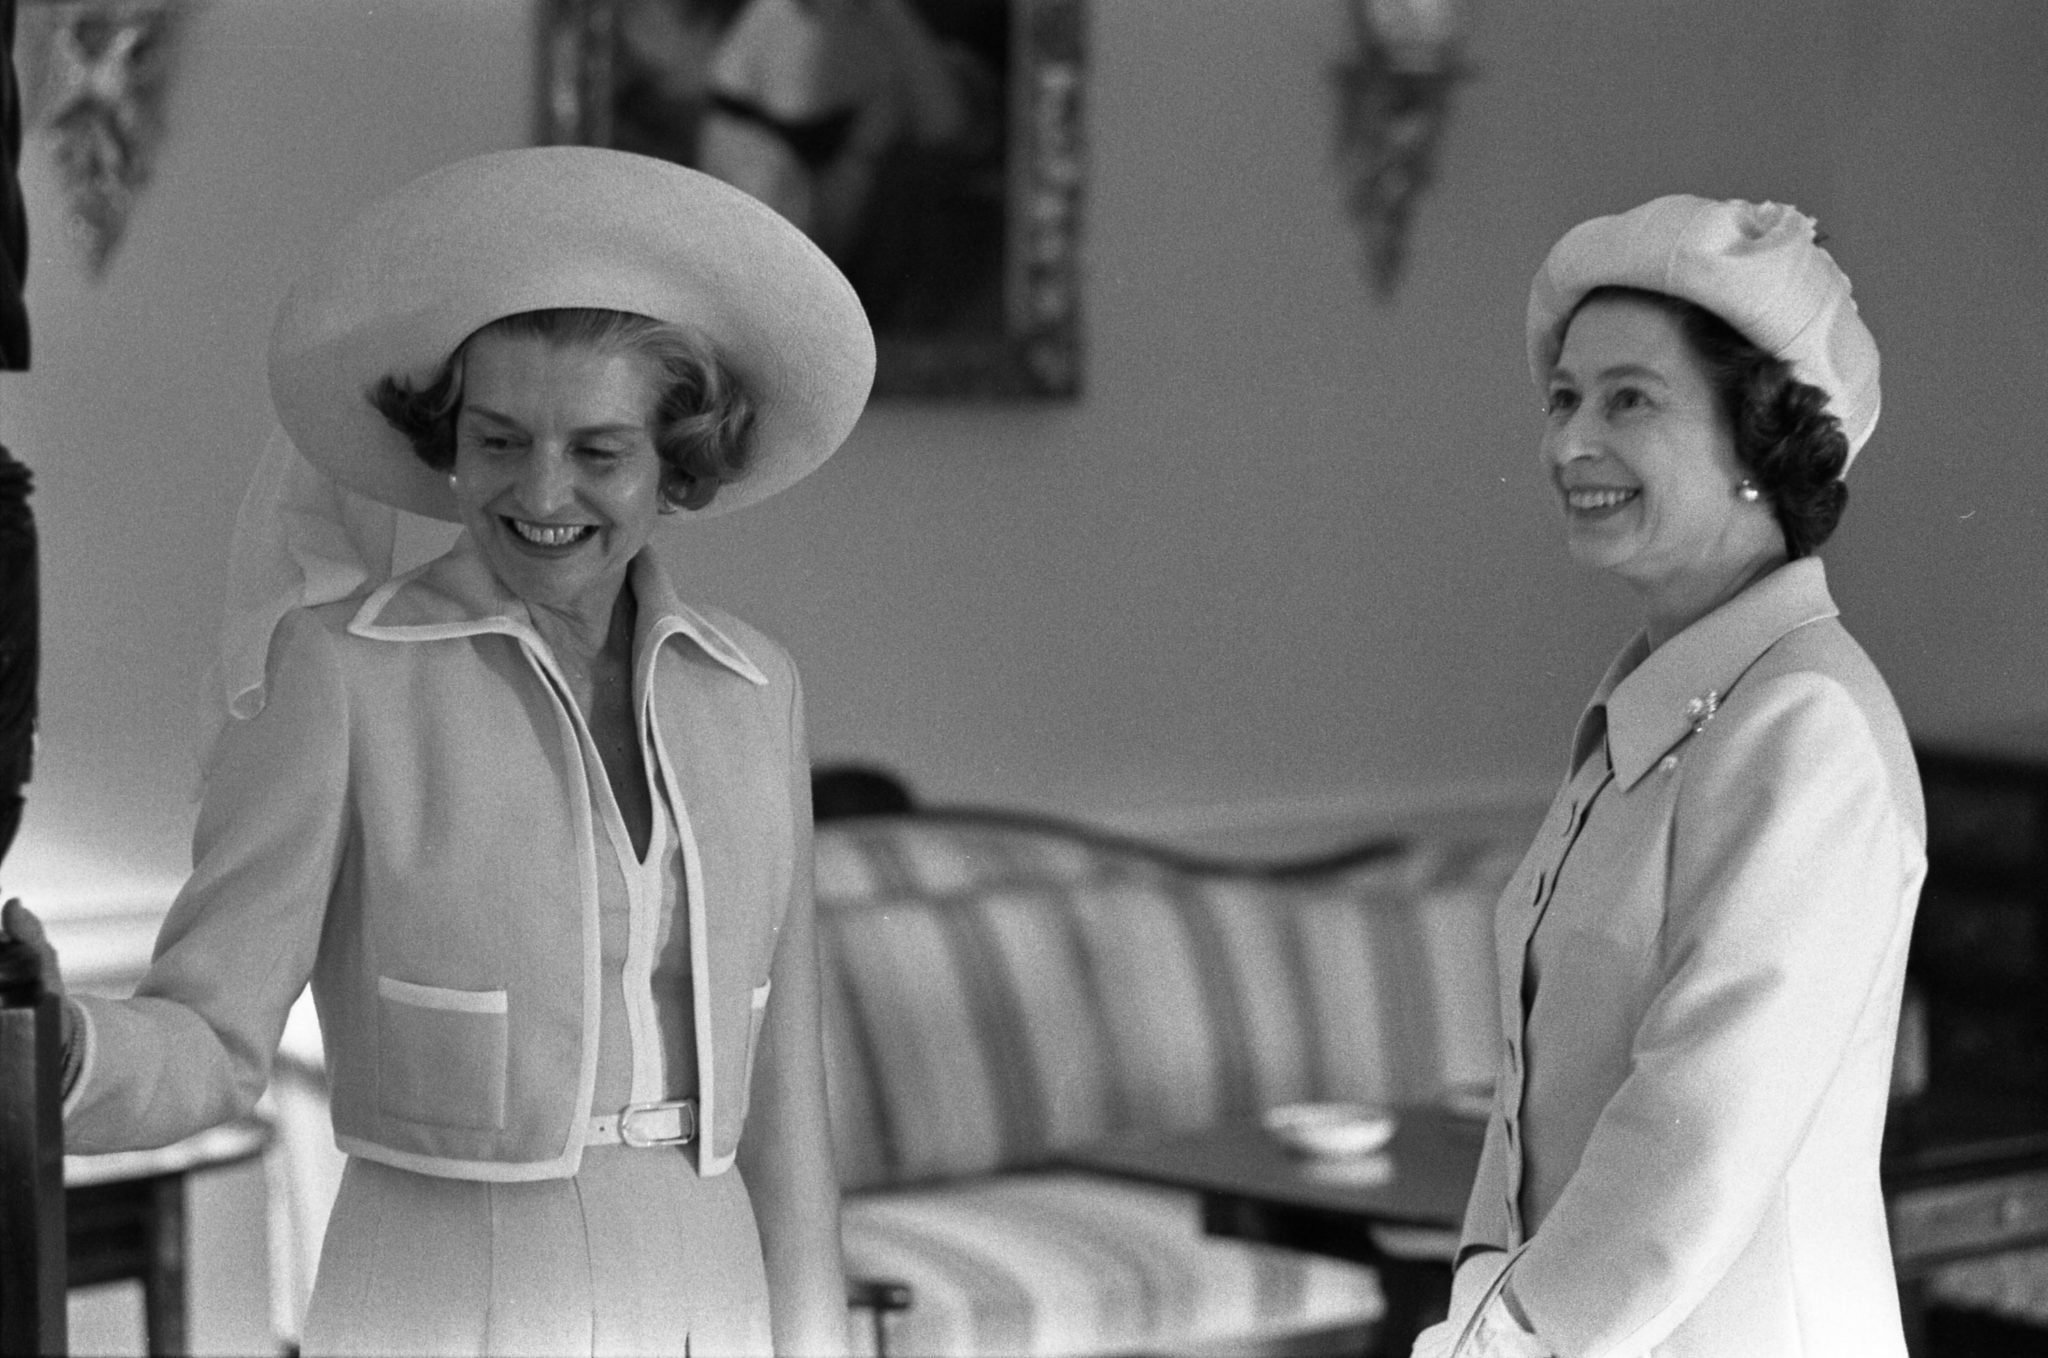 PHOTOS: Looking Back at Queen Elizabeth’s Visits to DC